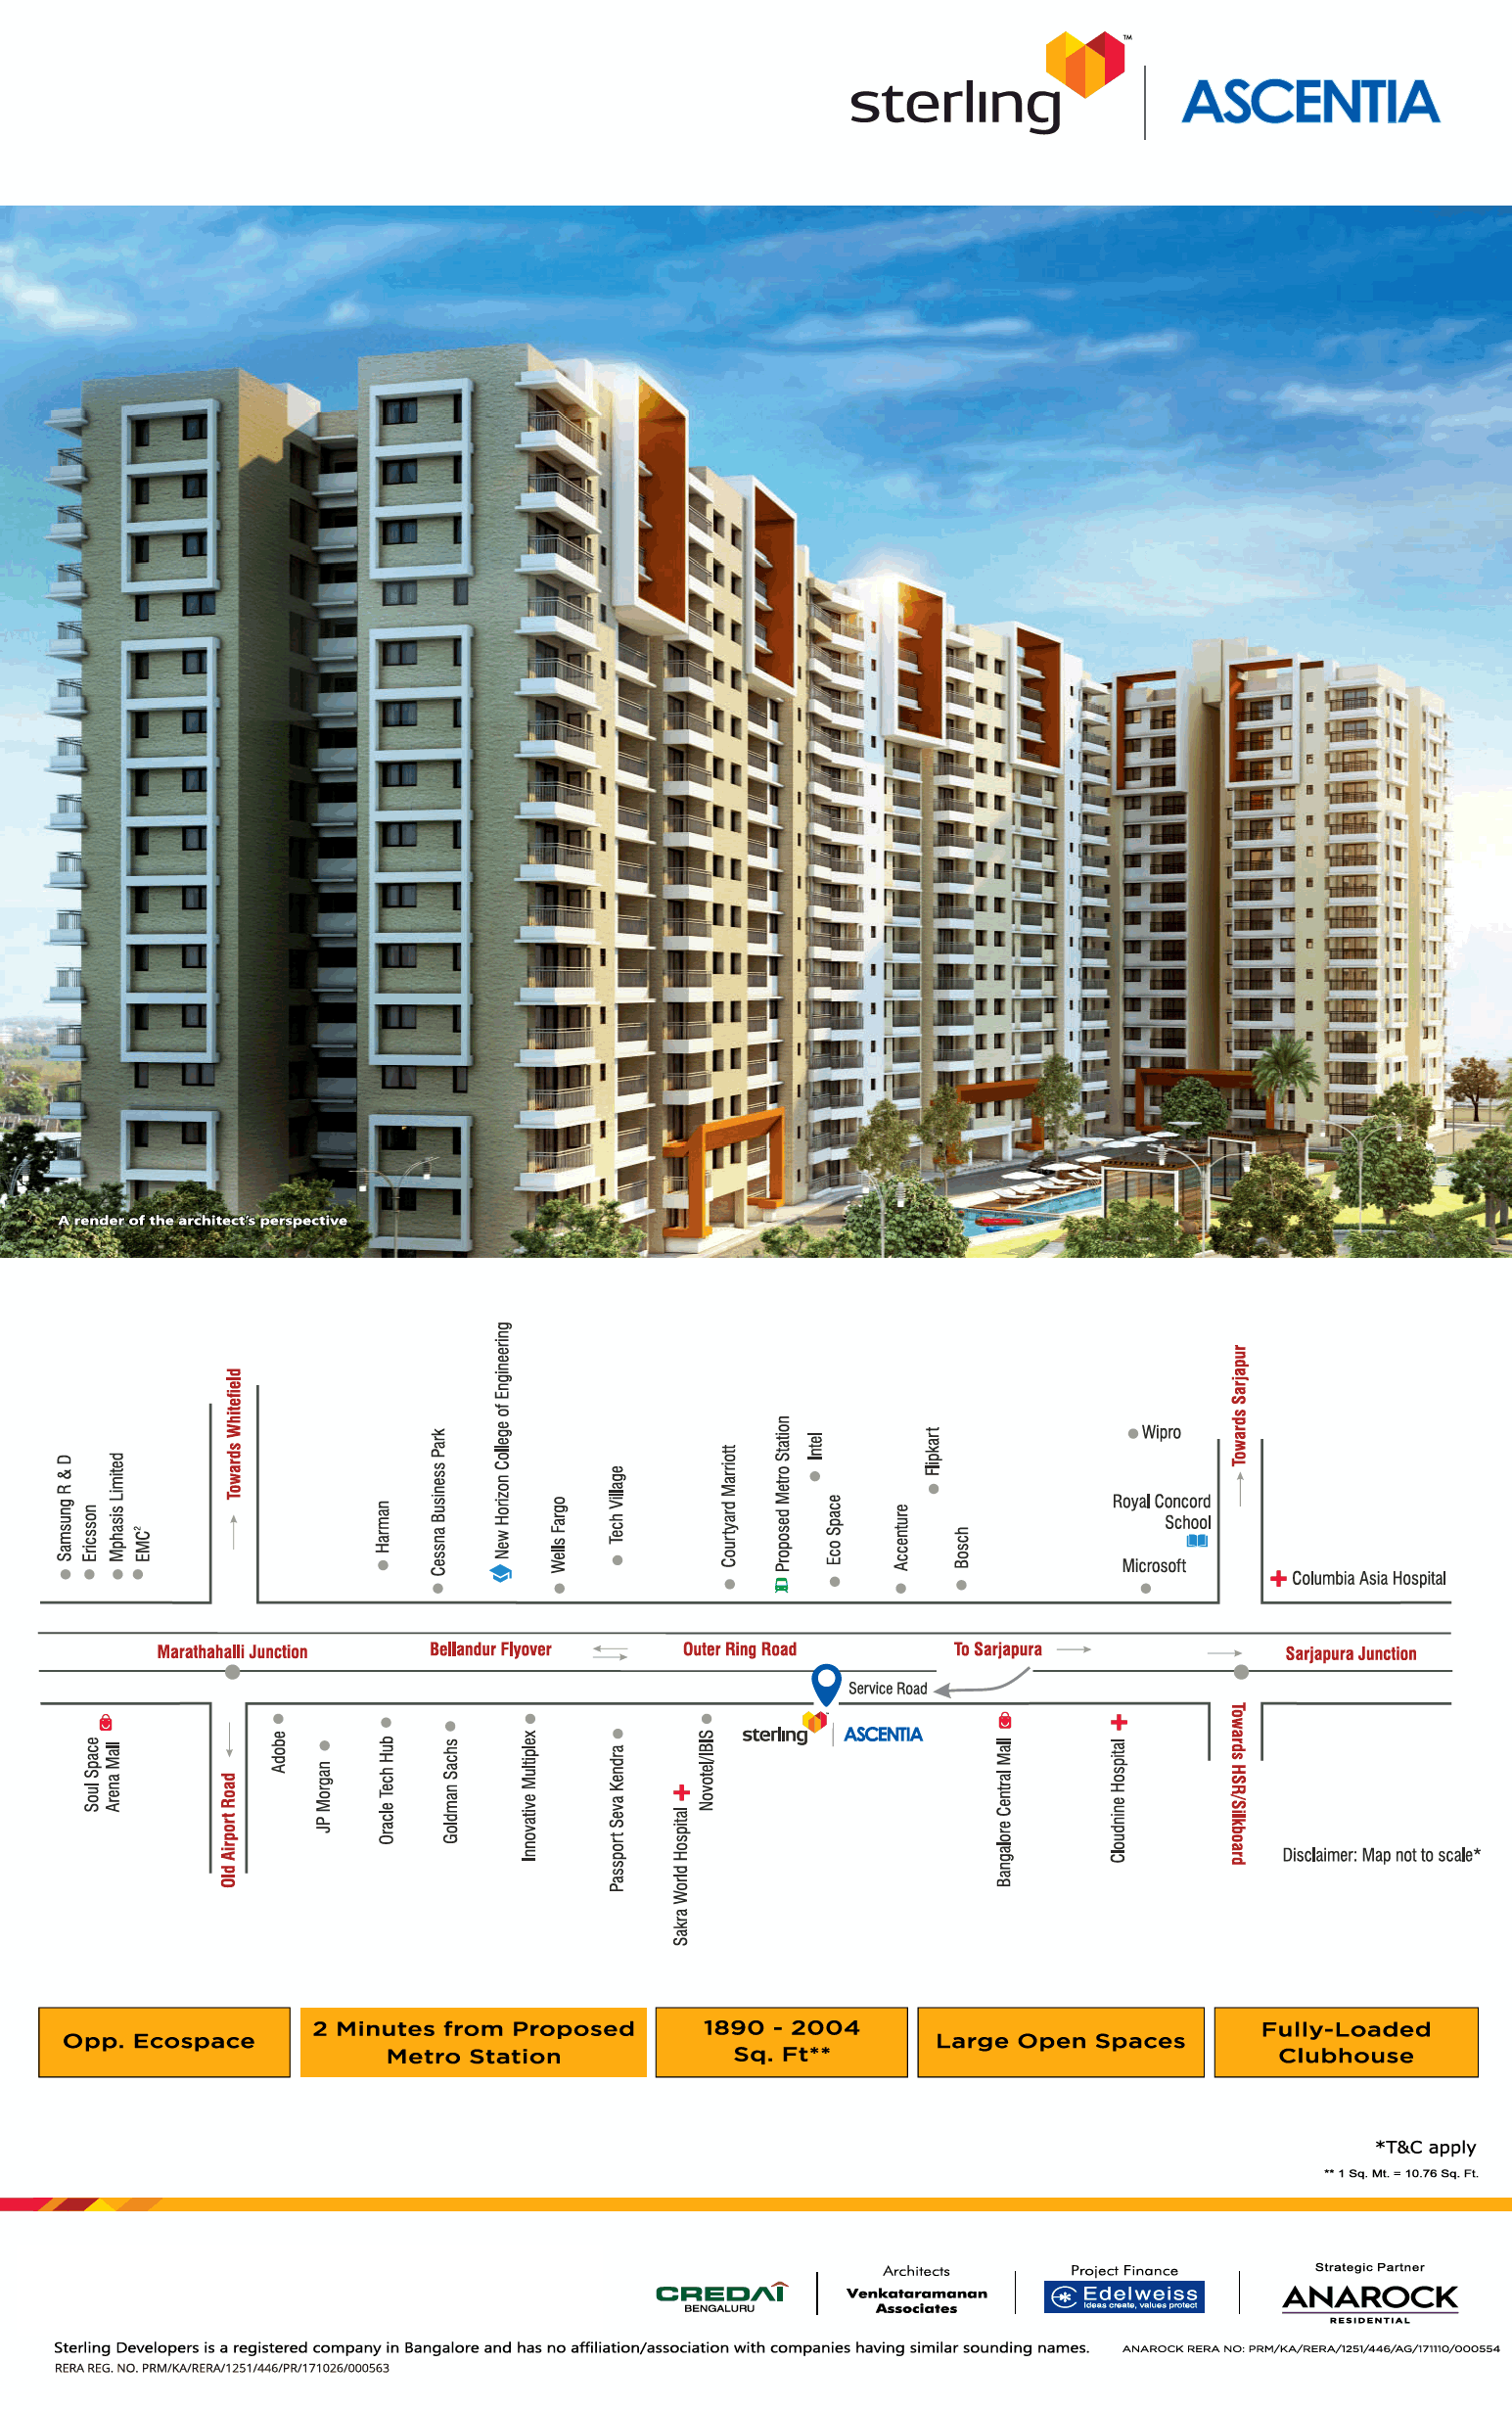 Launching towers 3 & 4 at Sterling Ascentia in Bangalore Update